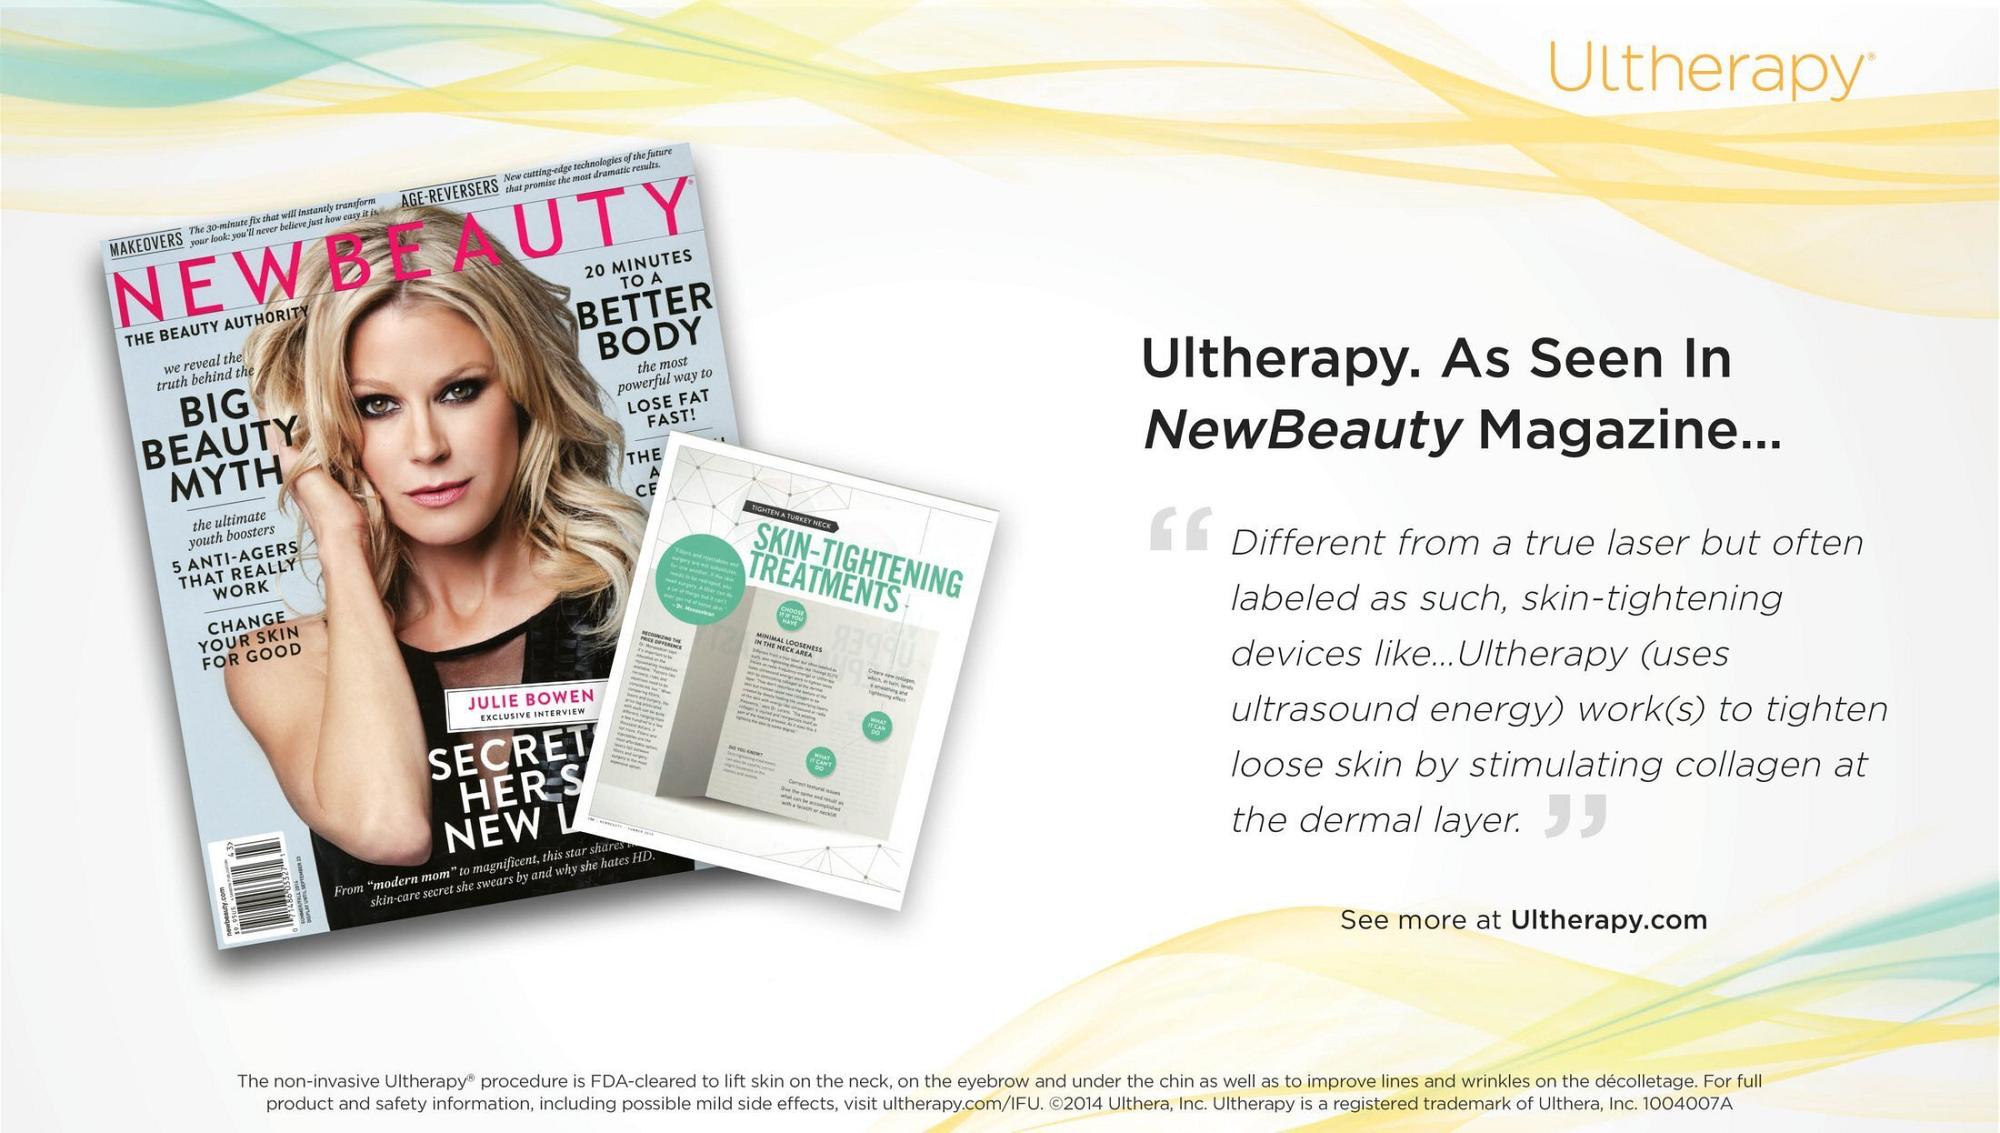 Ultherapy as seen in NewBeauty Magazine